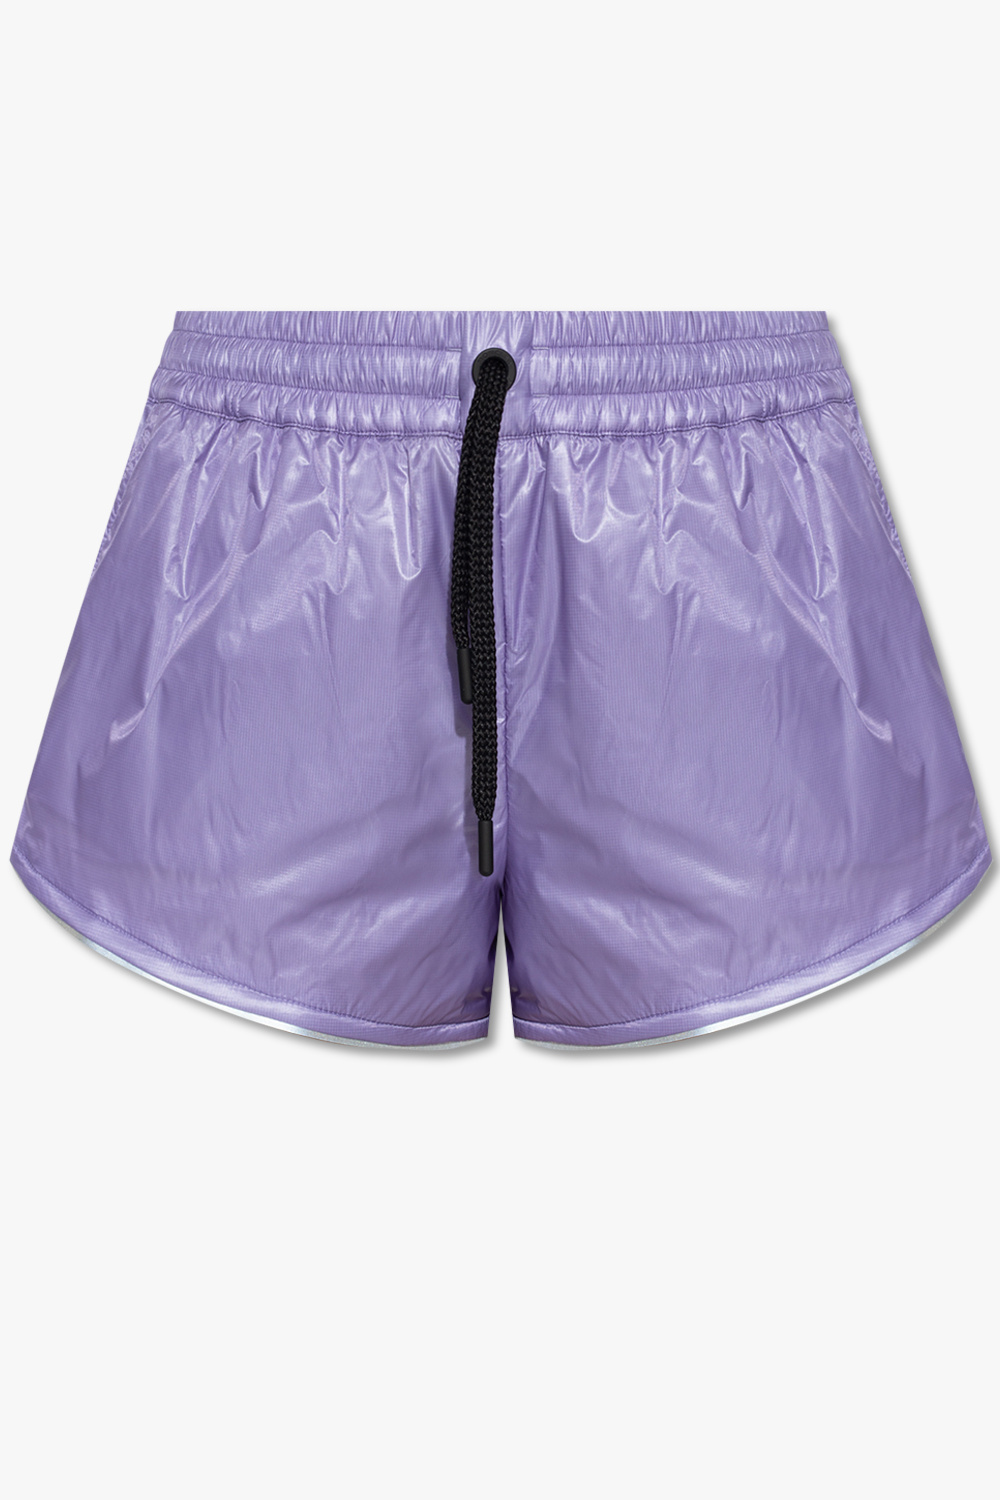 Azumi flare pants - Zoot Run Pch 3inch tiered Shorts Moncler Grenoble -  IetpShops Mayotte